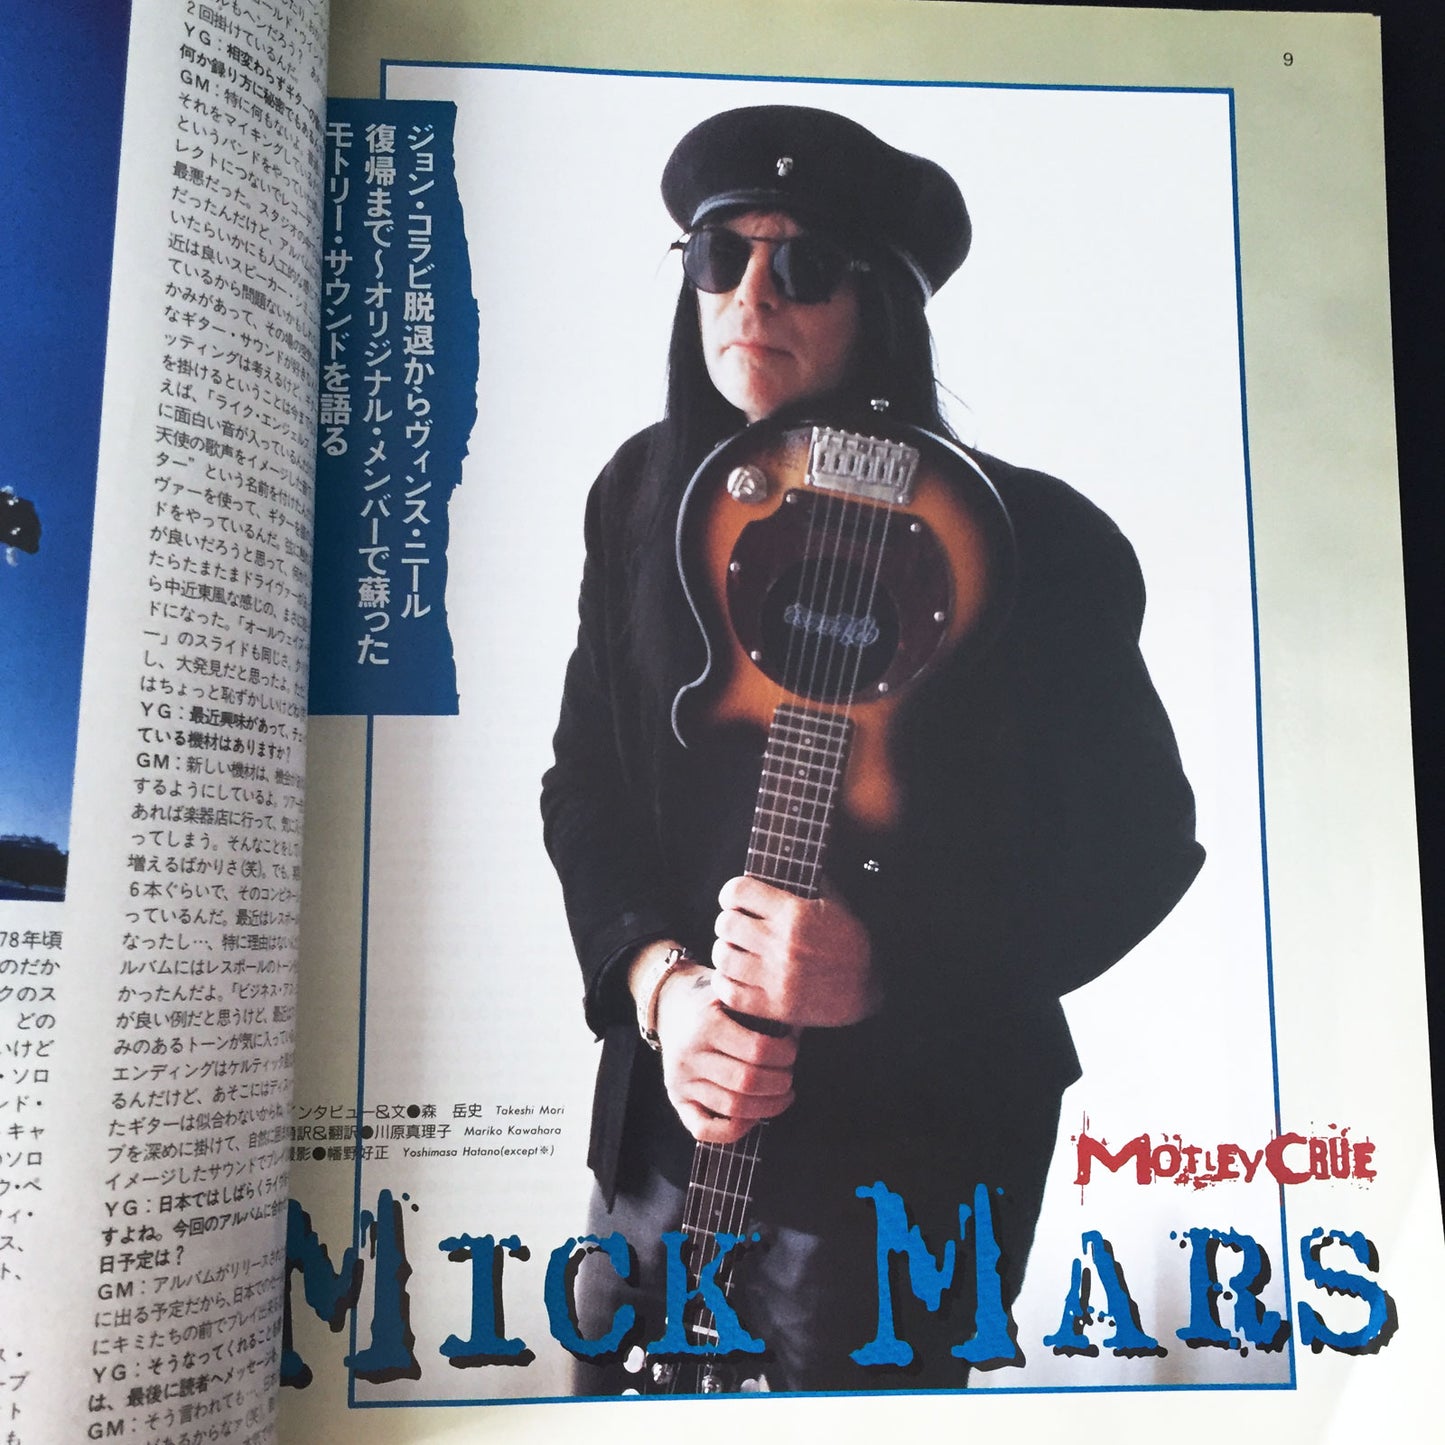 Young Guitar Magazine July 1997